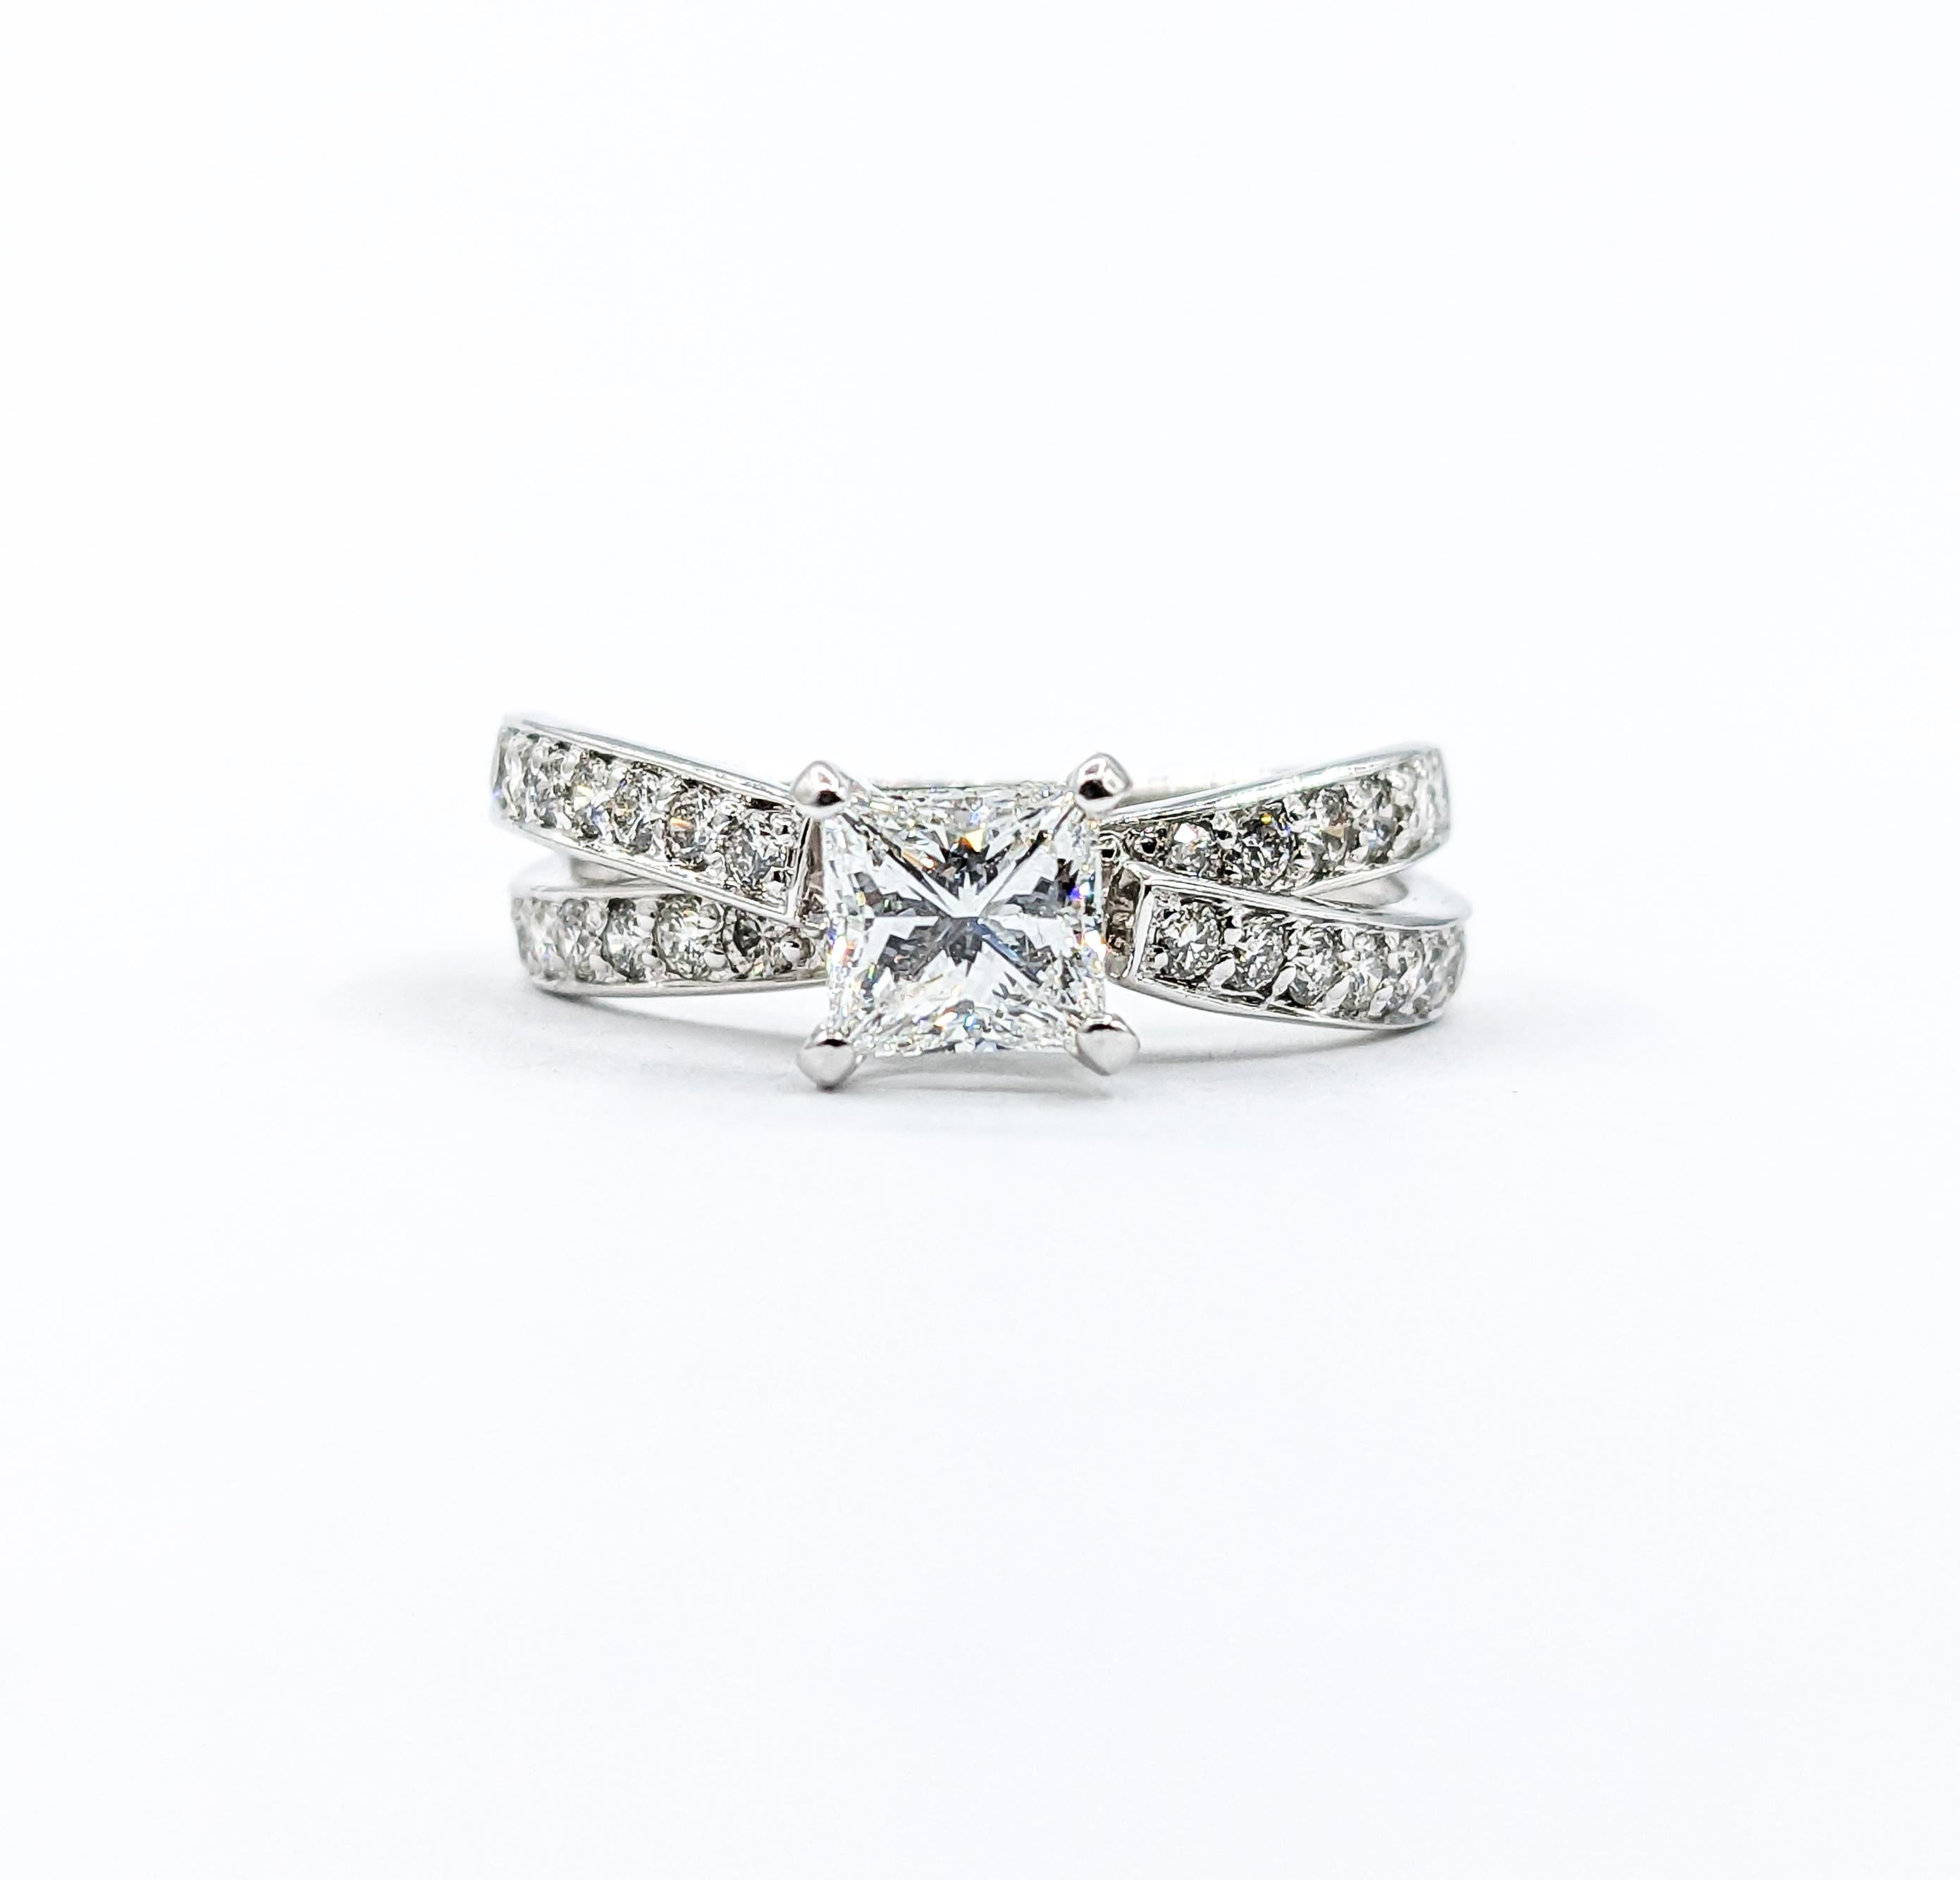 1.10ctw Diamond Engagement Ring In White Gold

Introducing our Princess Cut GIA certified Ring, exquisitely forged in 14kt white gold. At the heart of this piece lies a .72 carat princess-cut diamond, resplendent with VVS1 clarity and an exceptional